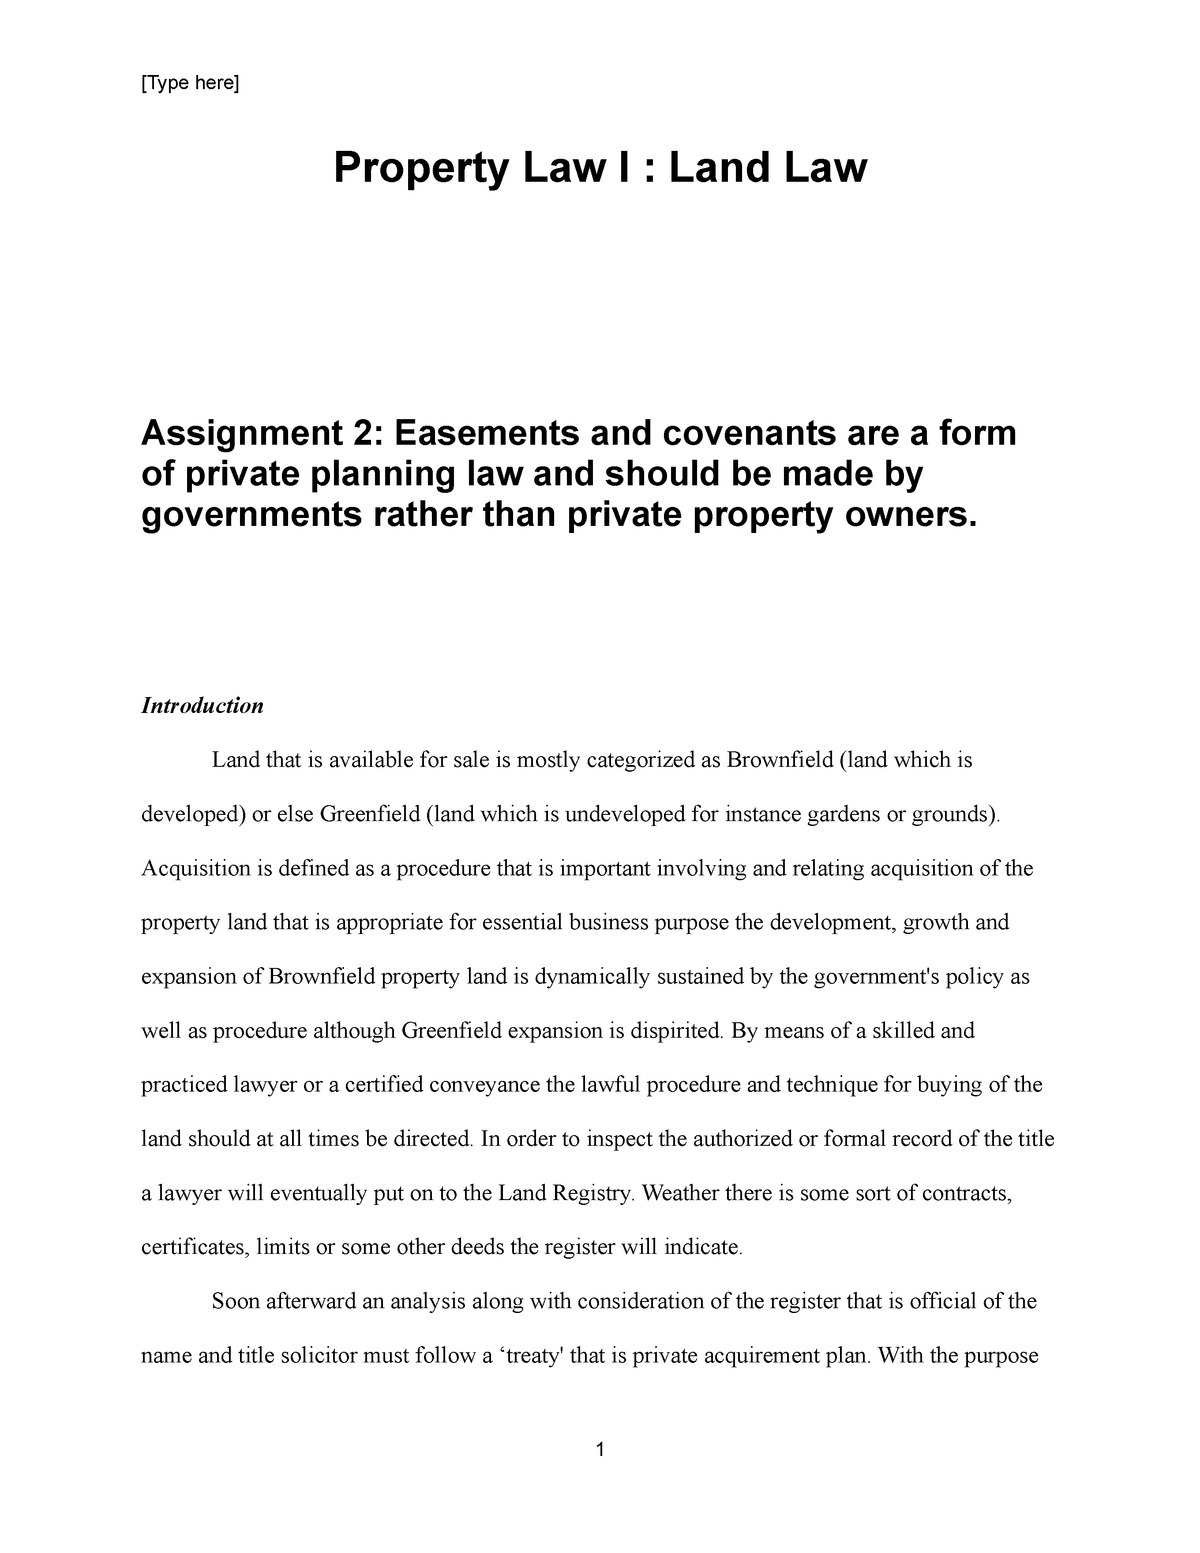 assignment property law act